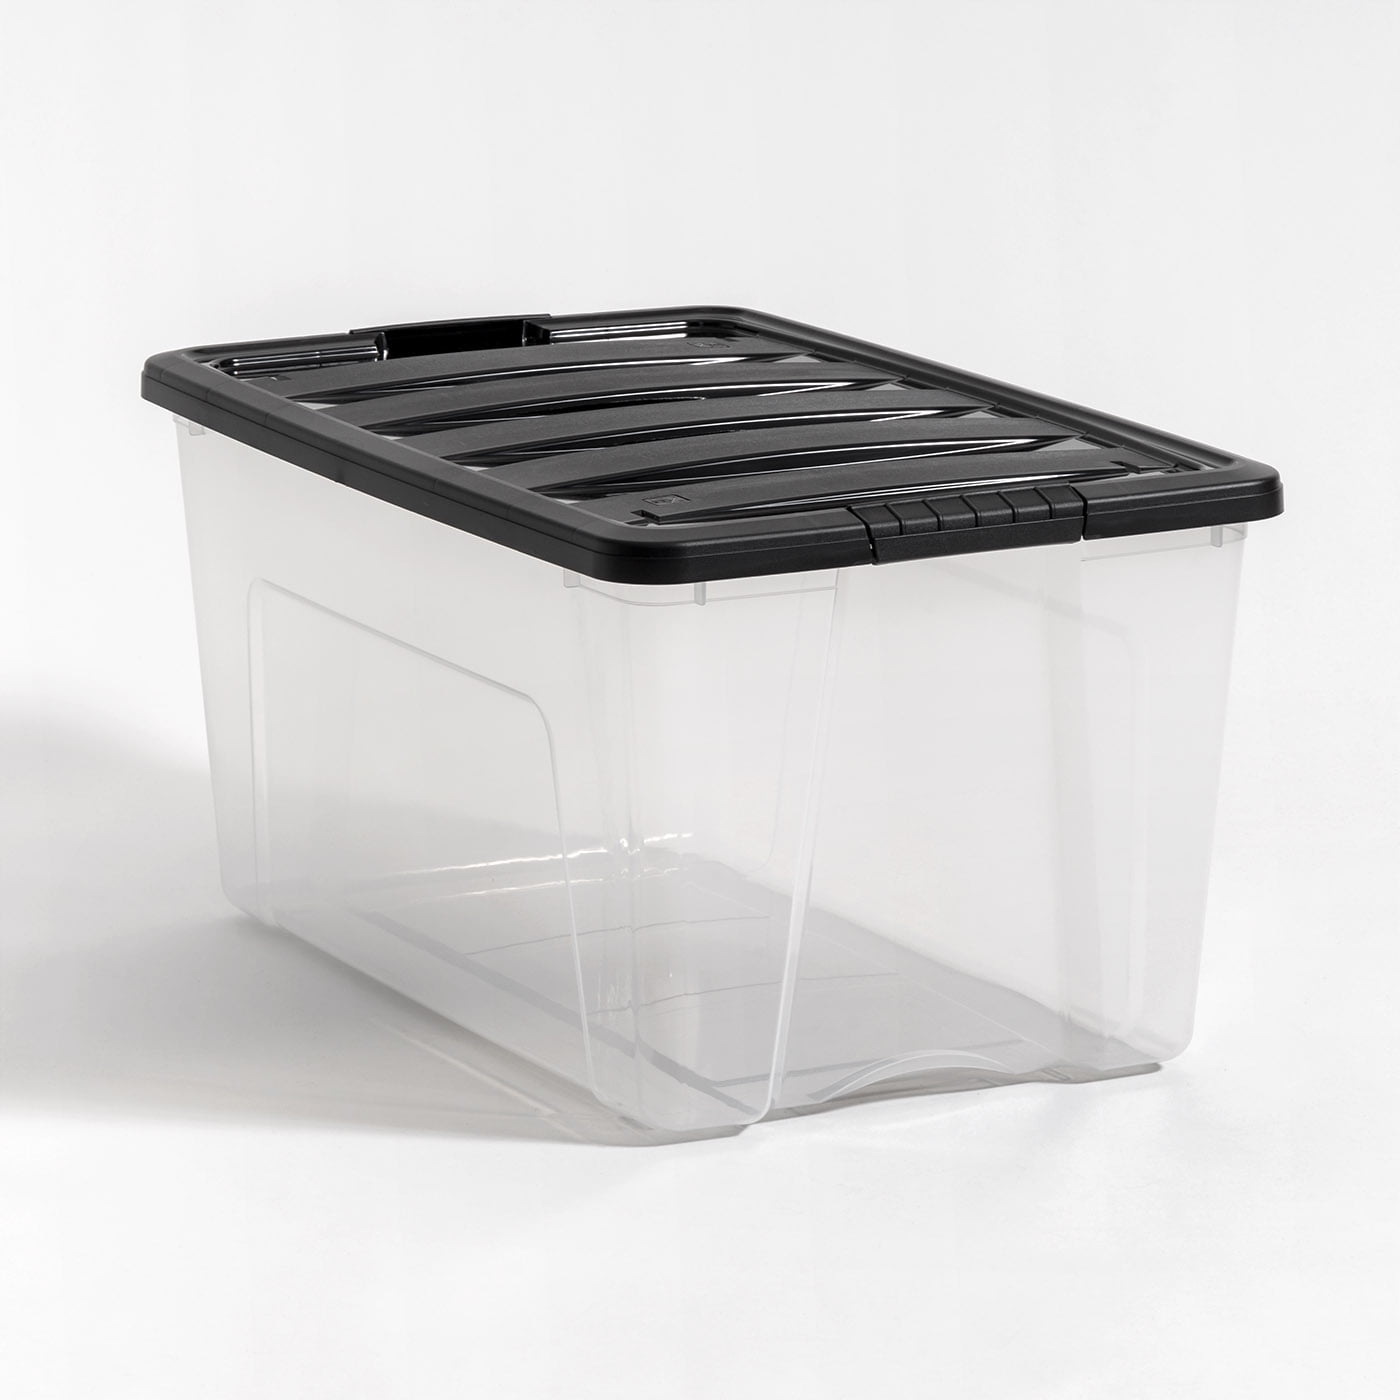 53.5 qt. Stack and Pull Clear Storage Box with Lid in Gray